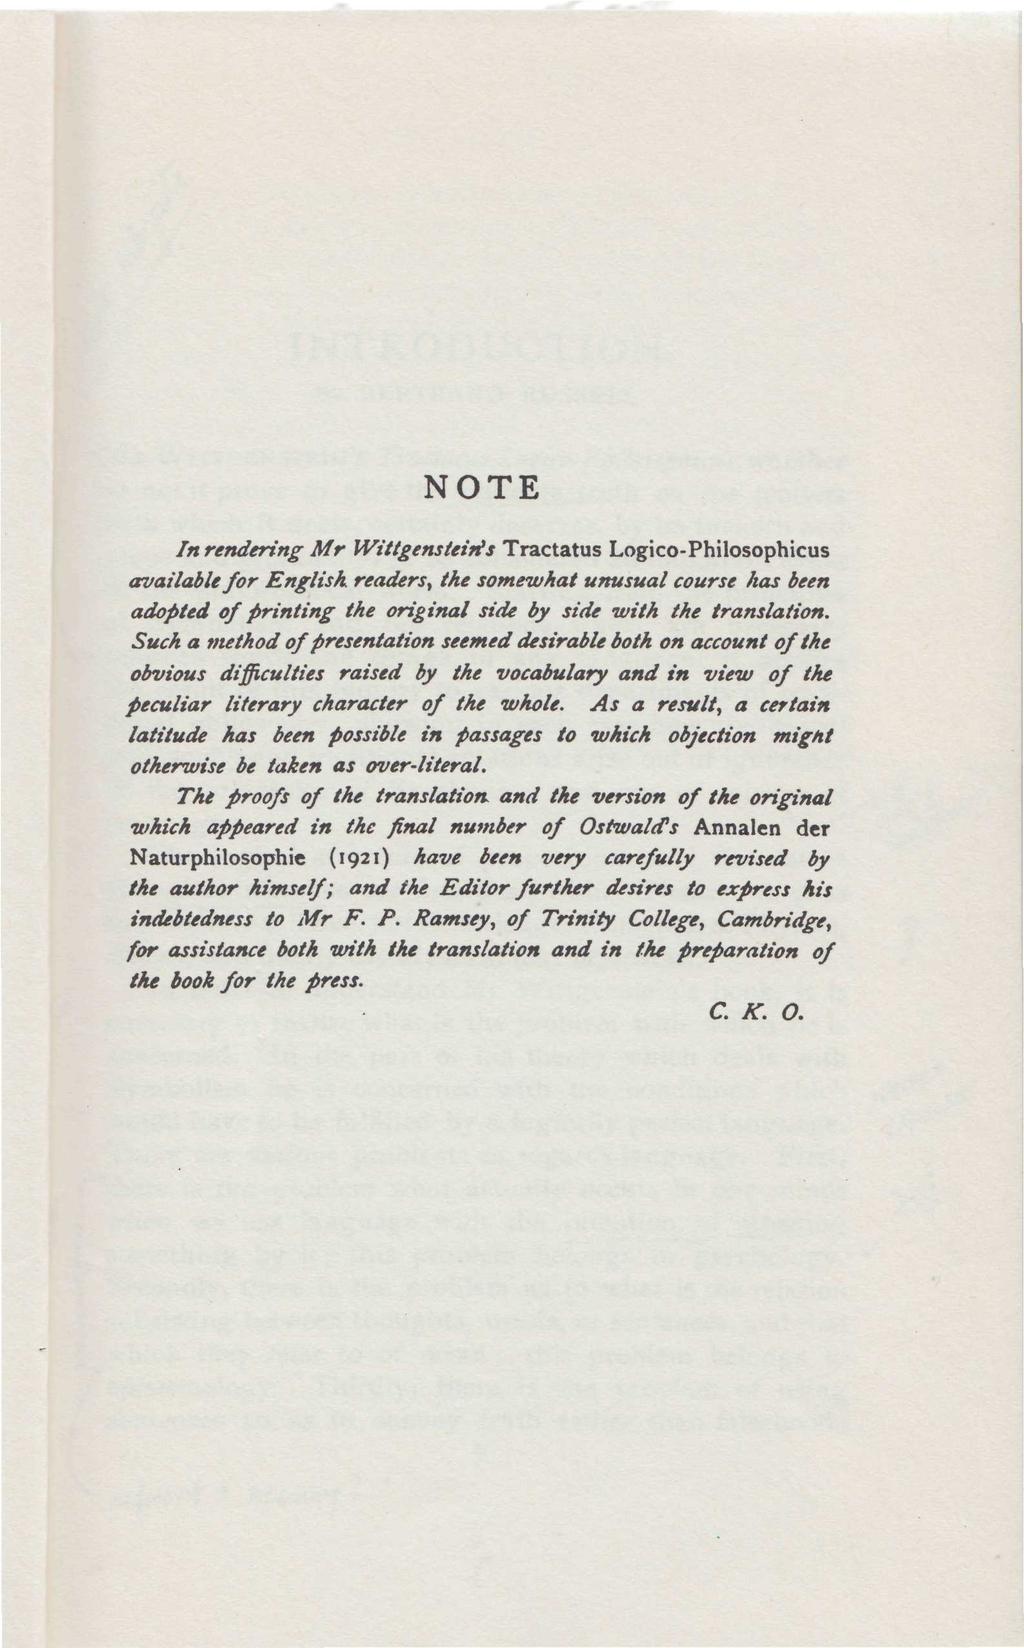 NOTE In rendering Mr Wittgenstein's Tractatus Logico-Philosophicus available for English readers, the somewhat unusual course lias been adopted of printing the original side by side with the